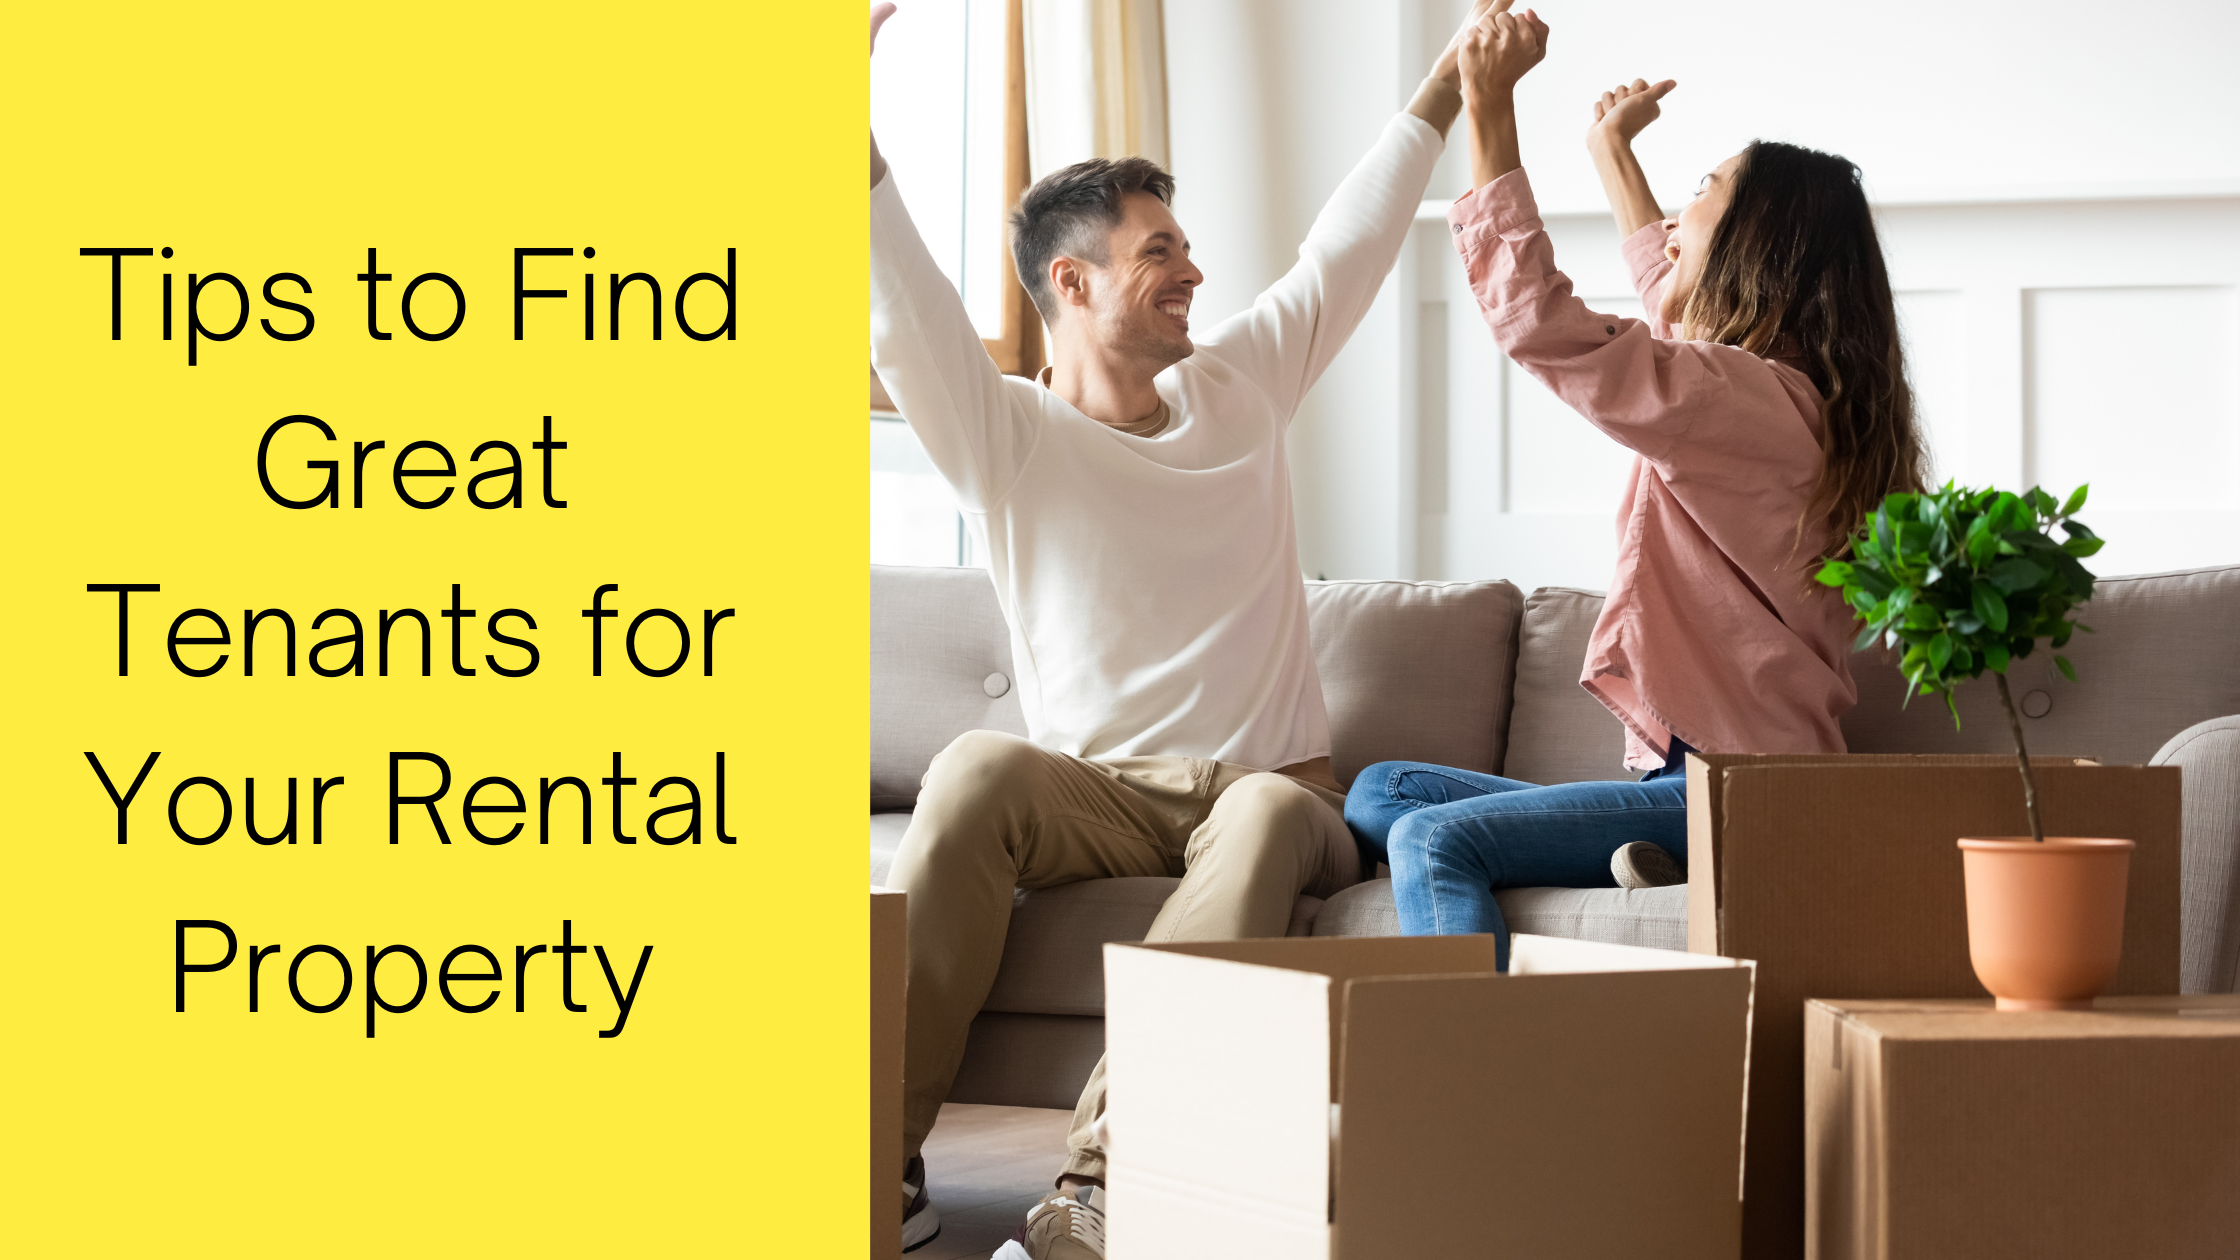 Tips to Find Great Tenants for Your Rental Property